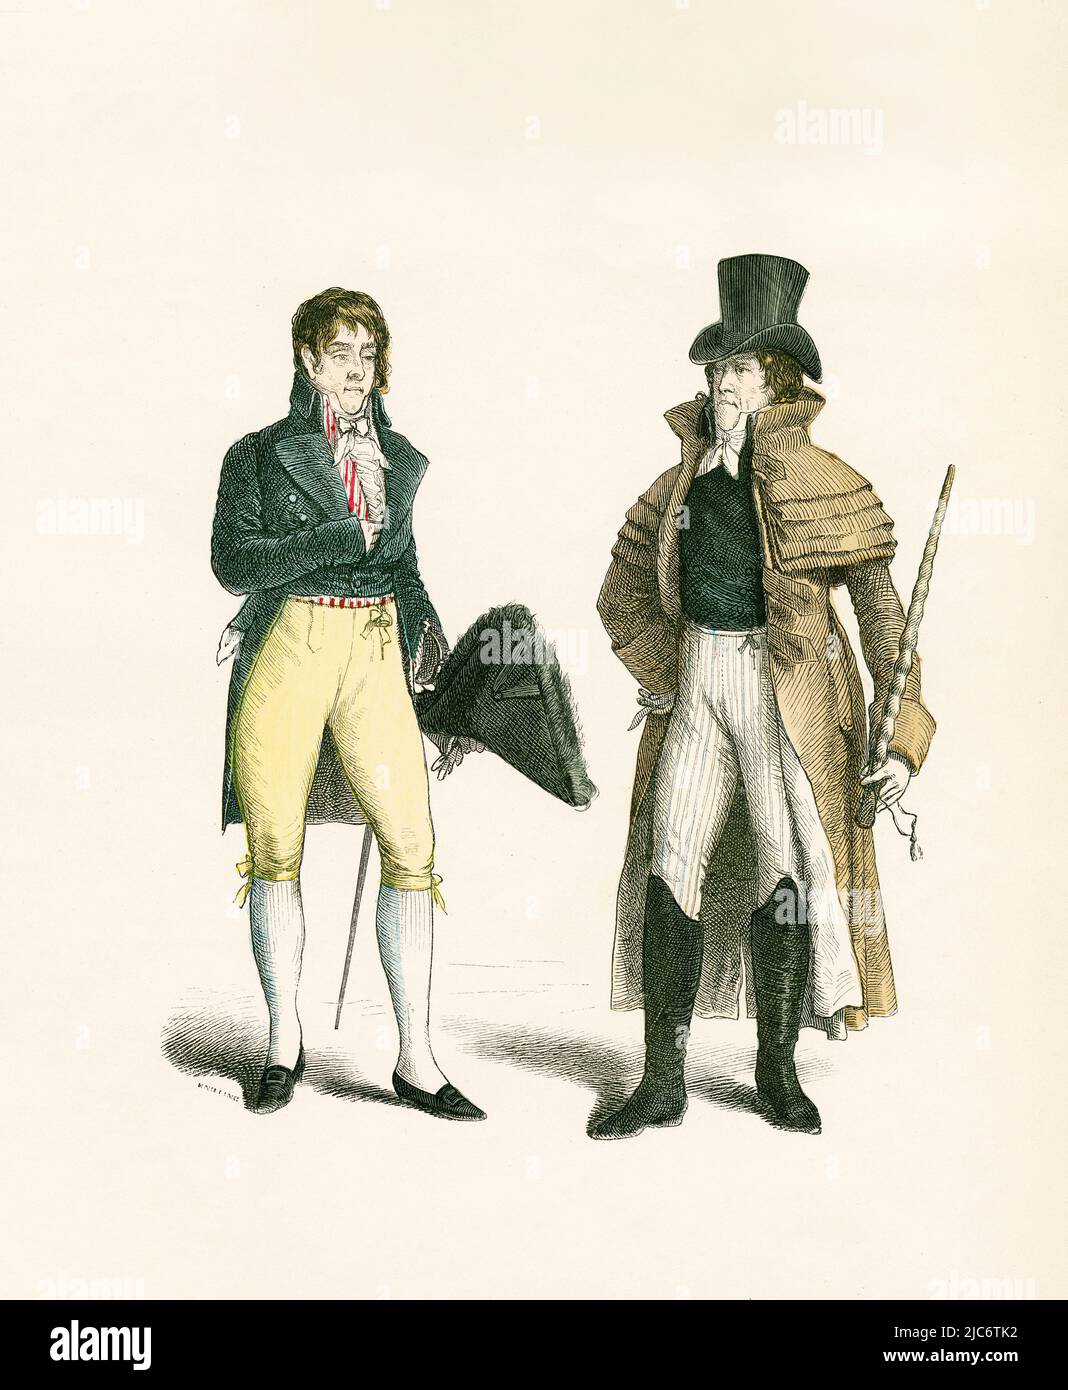 Man in Court Dress, Man with Garrick, early 19th Century, Illustration ...